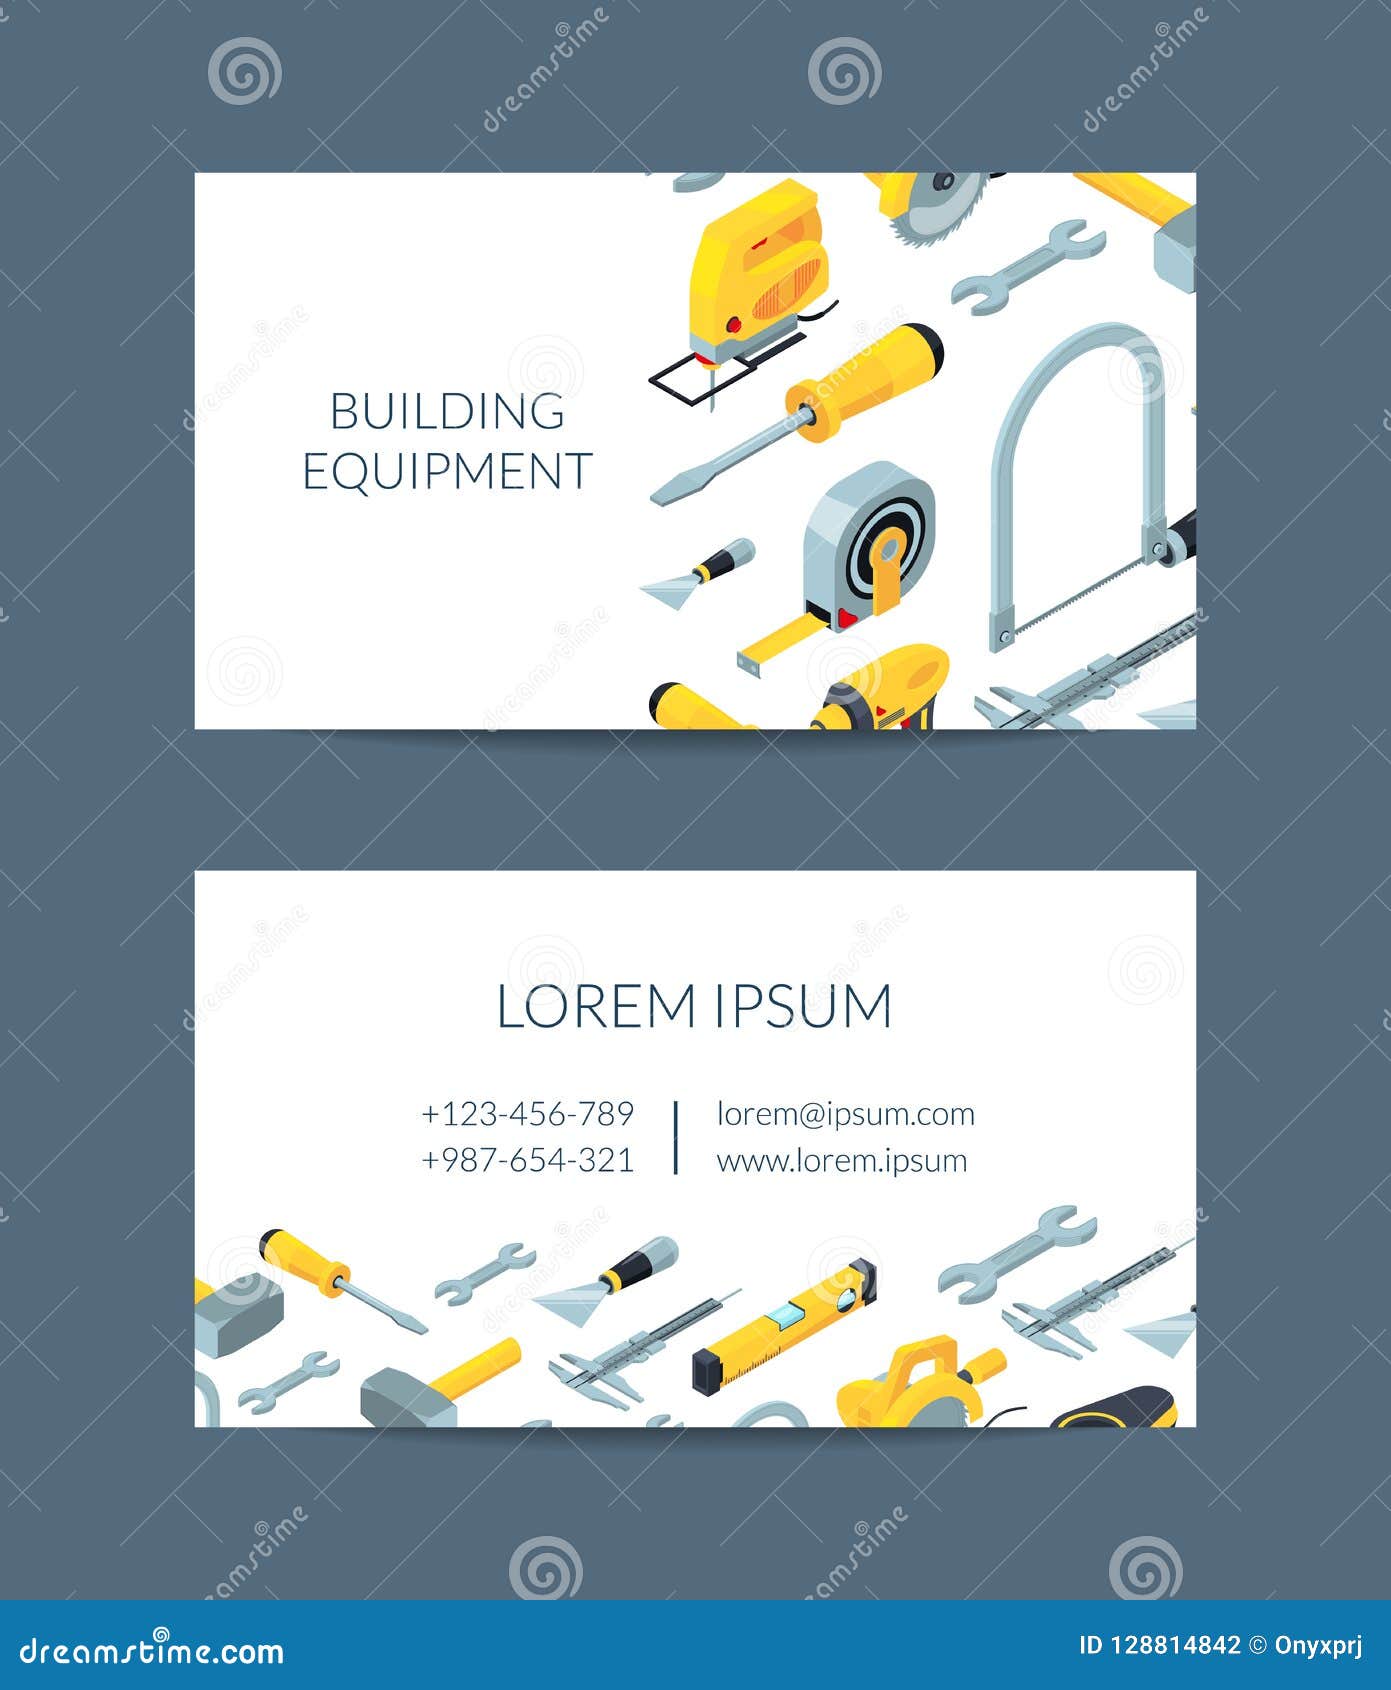 Vector Construction Tools Isometric Icons Business Card Template With Construction Business Card Templates Download Free